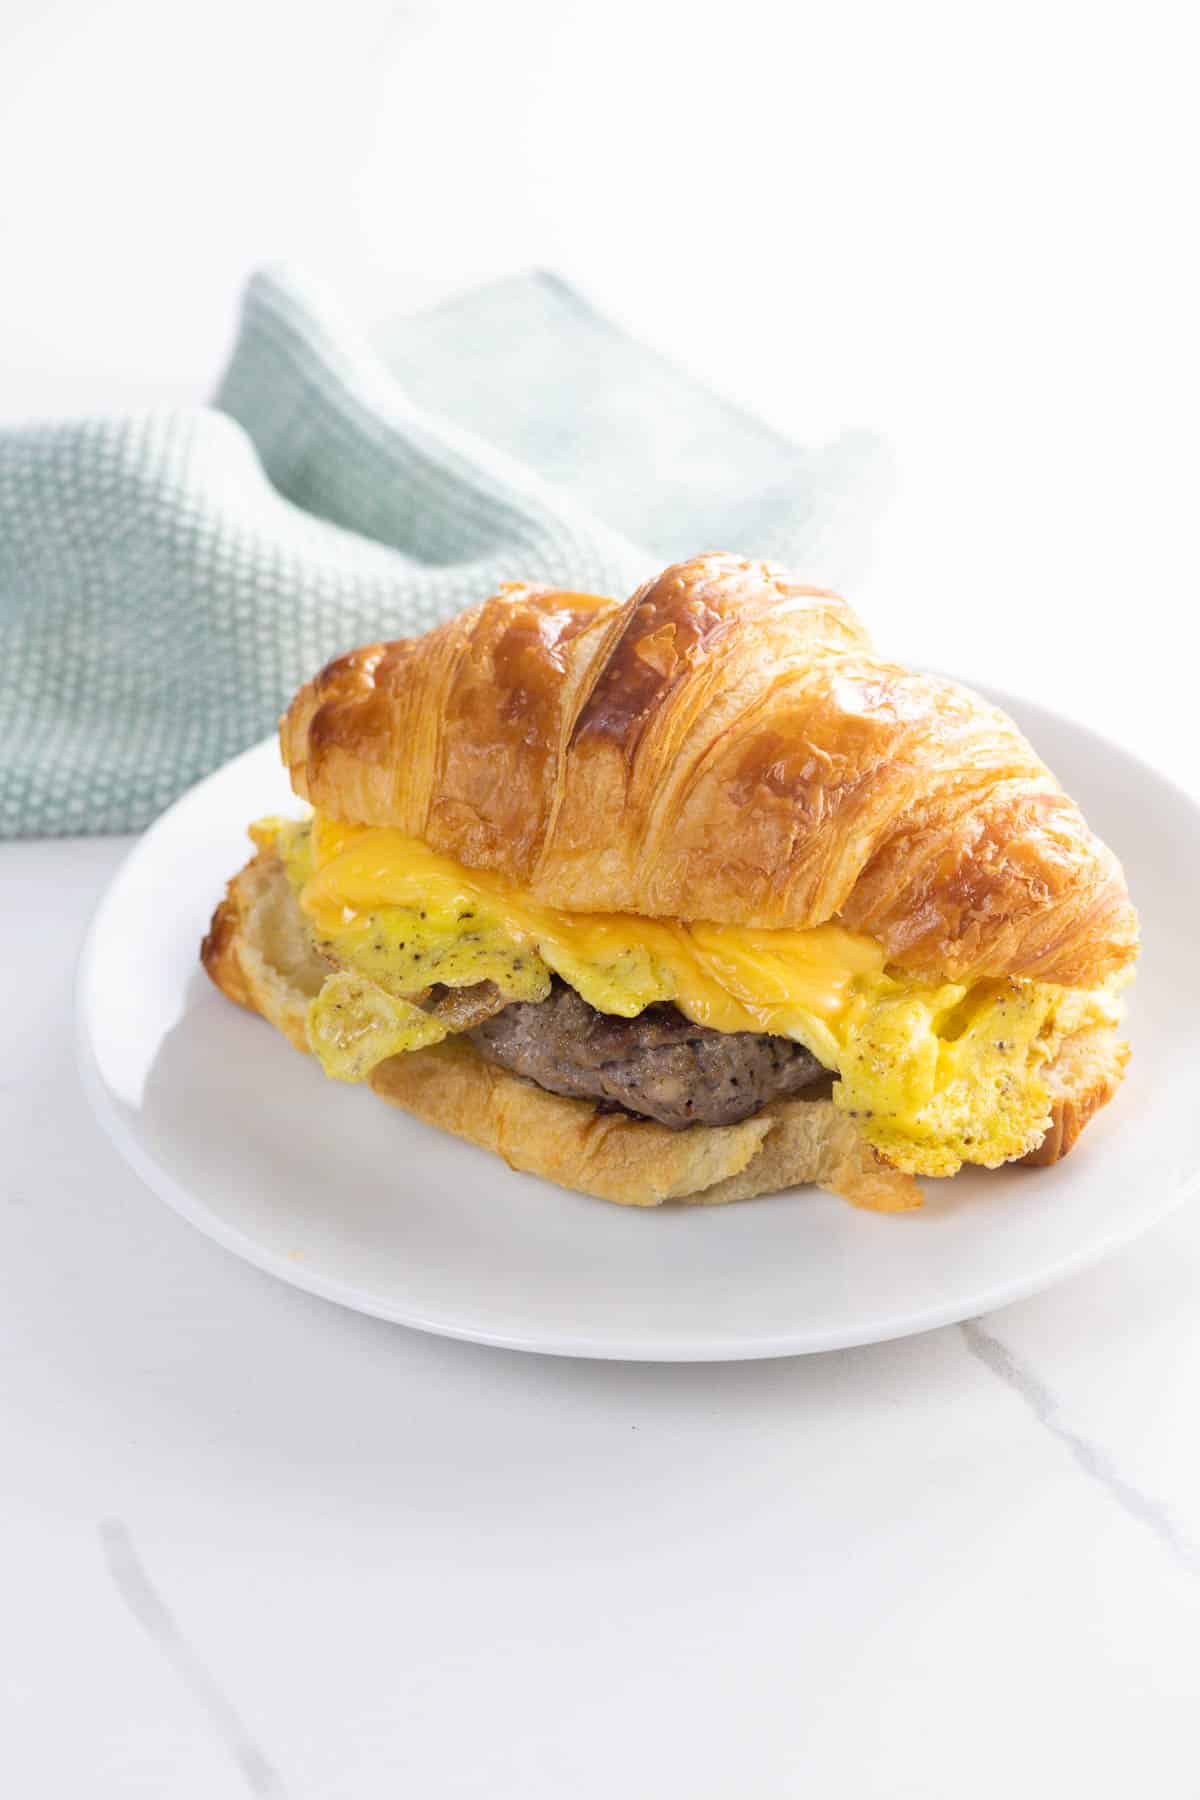 a sausage egg and cheese croissant on a plate with a napkin